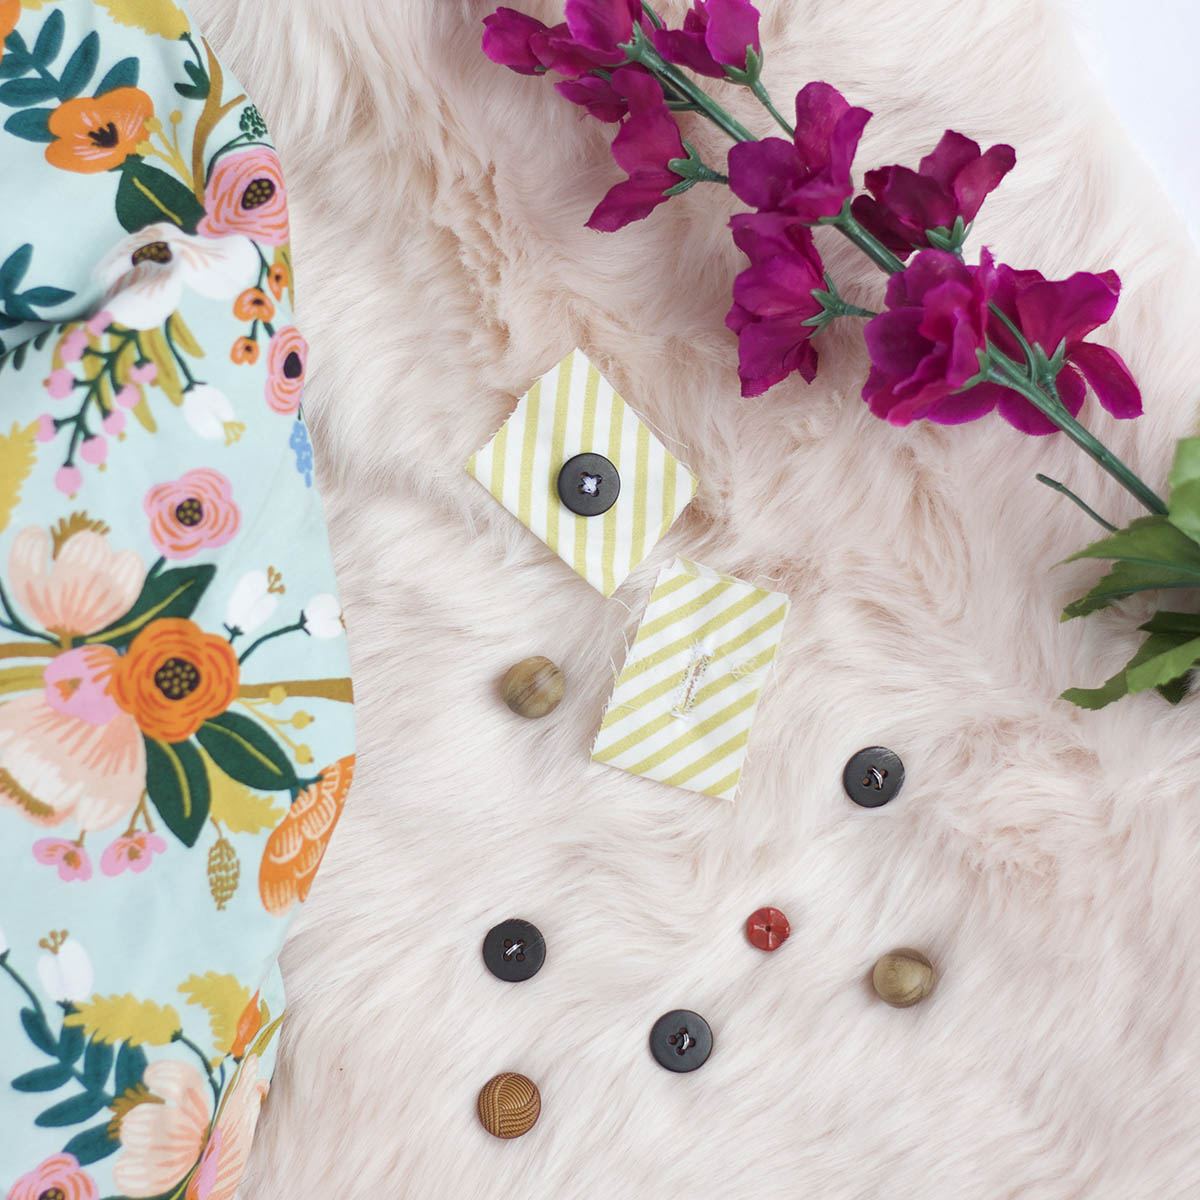 How to Sew a Button and Buttonhole